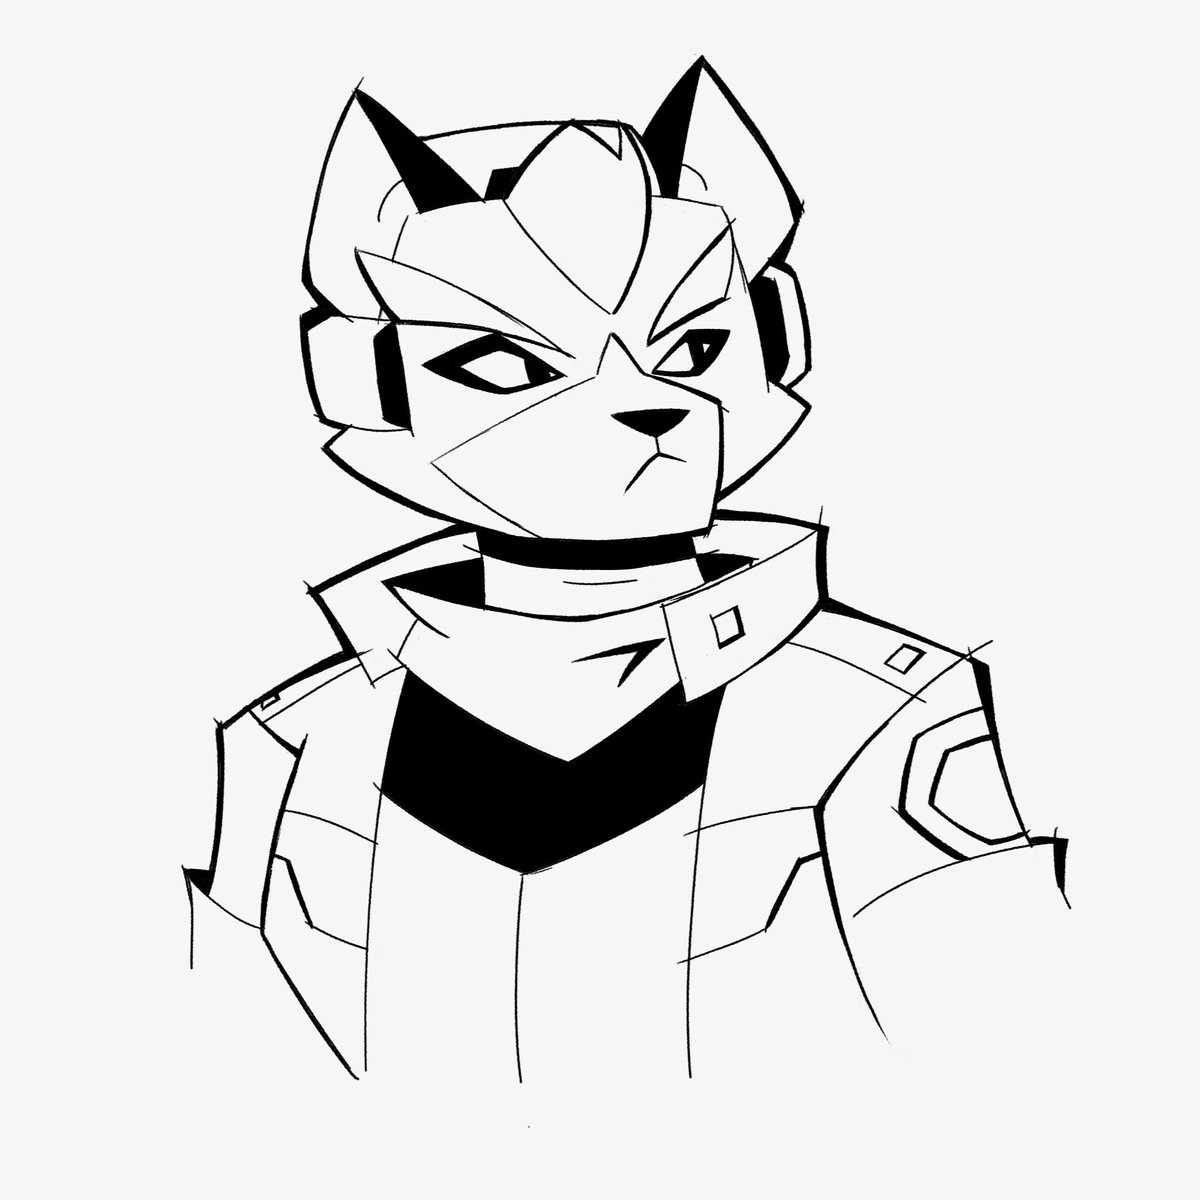 Twitter compression will probably not show it, but I tried out a new brush.

#Starfox